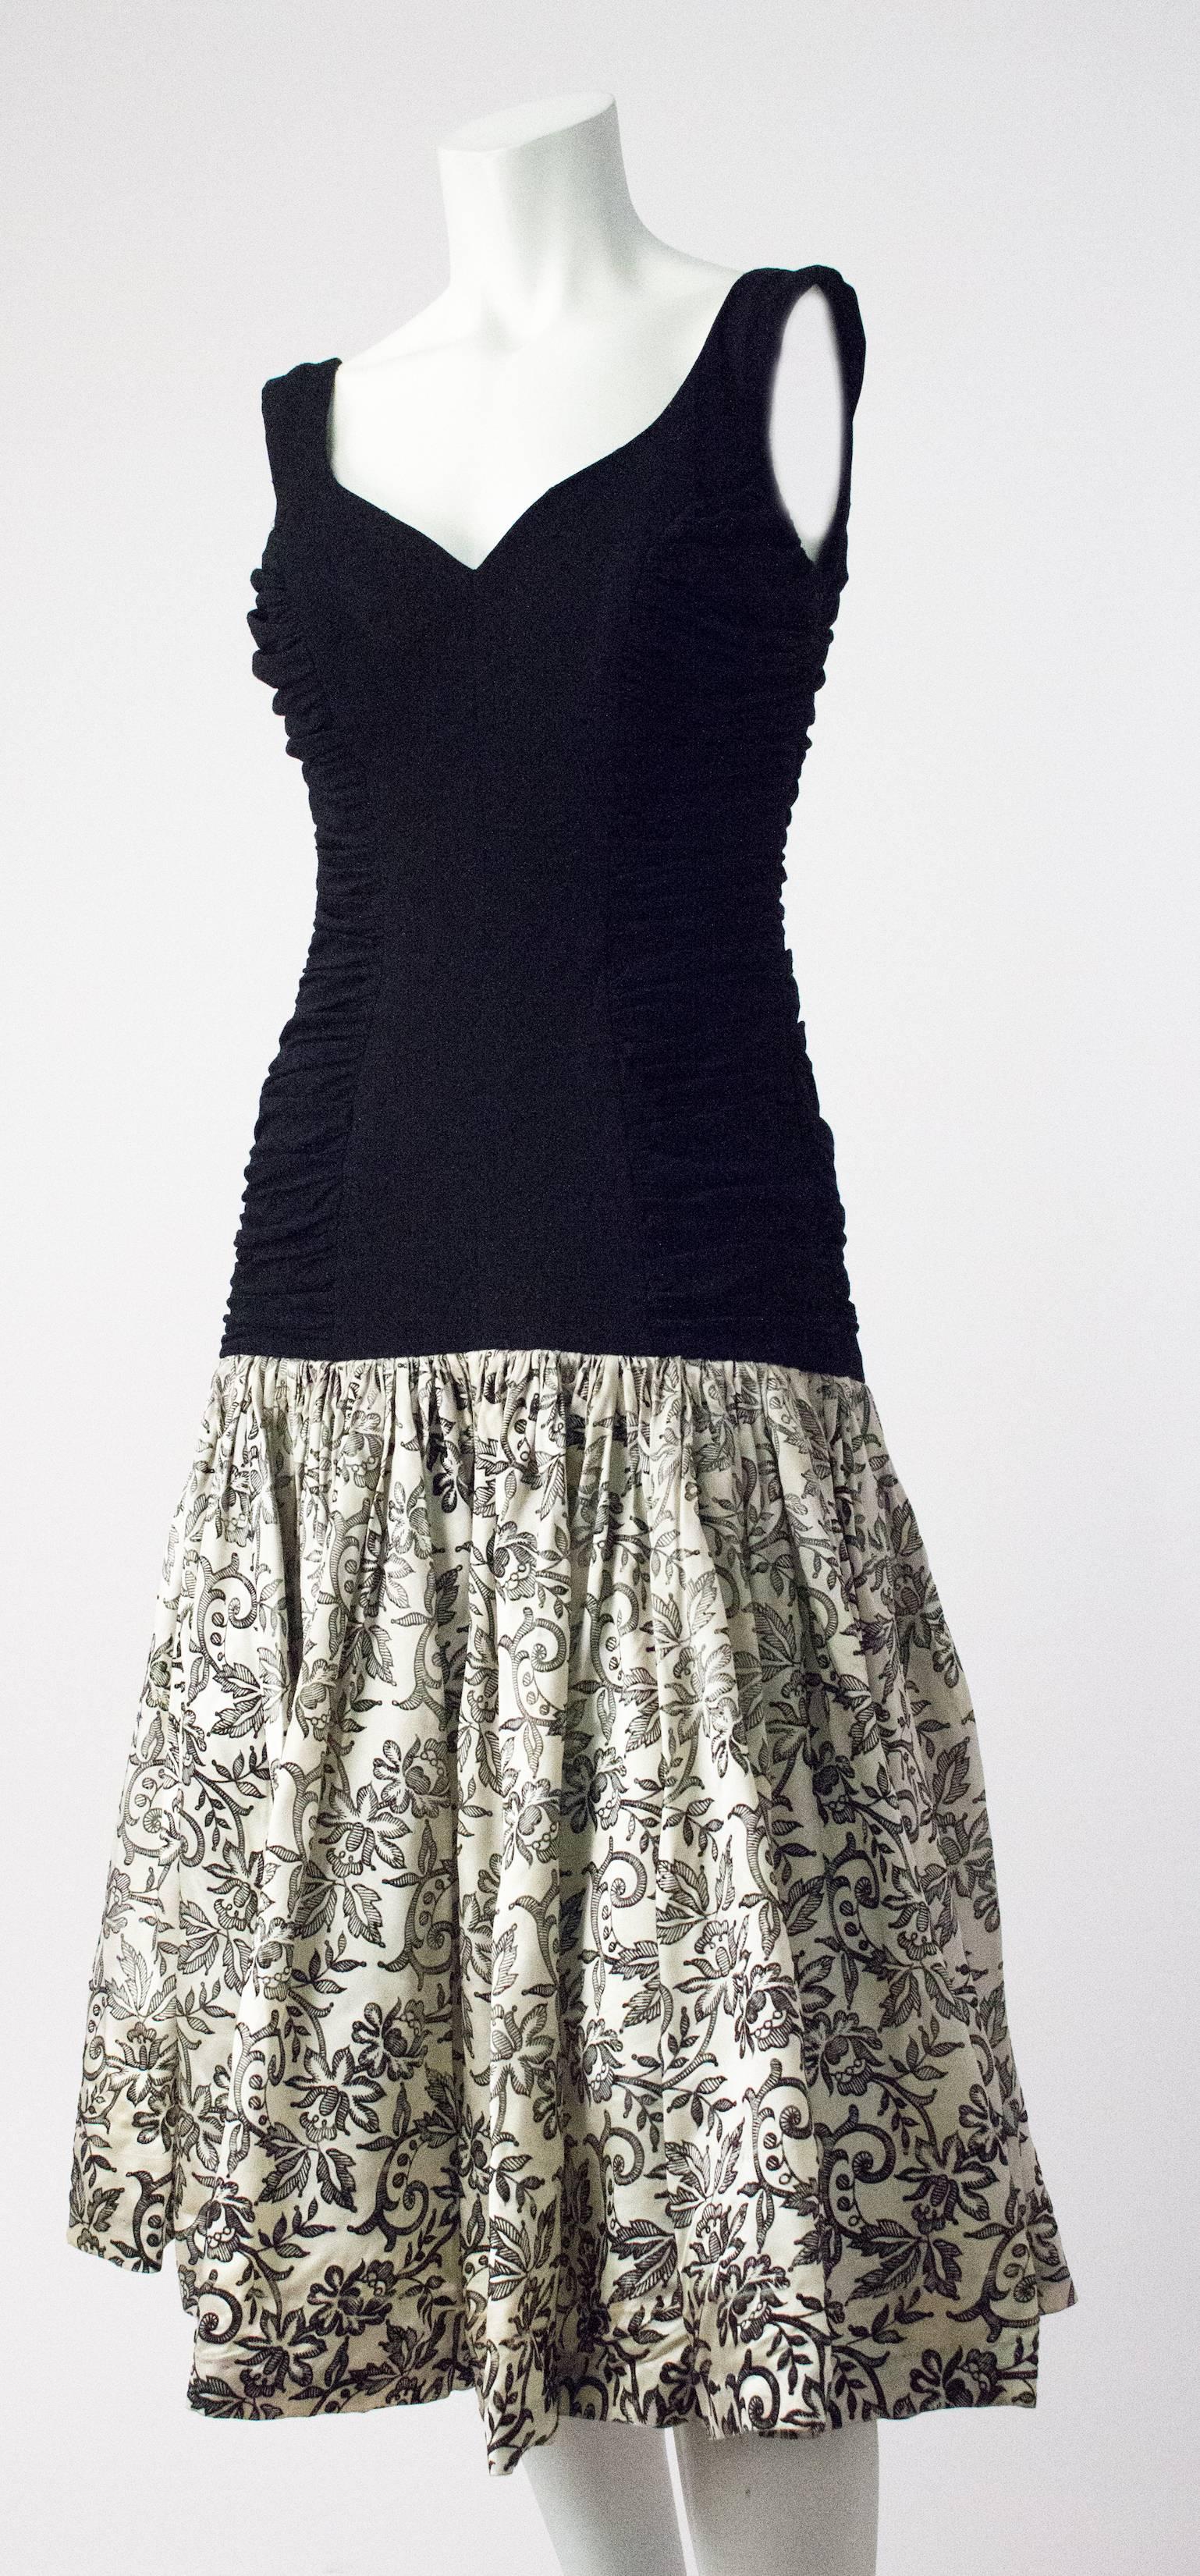 50s flocked Velvet Drop Waist Cocktail Dress. There is a lot of fading and wear on the velvet of the skirt, as well as badly done repairs to the shoulder and armhole area. That being said, the fit and style of this dress is amazing! It would be